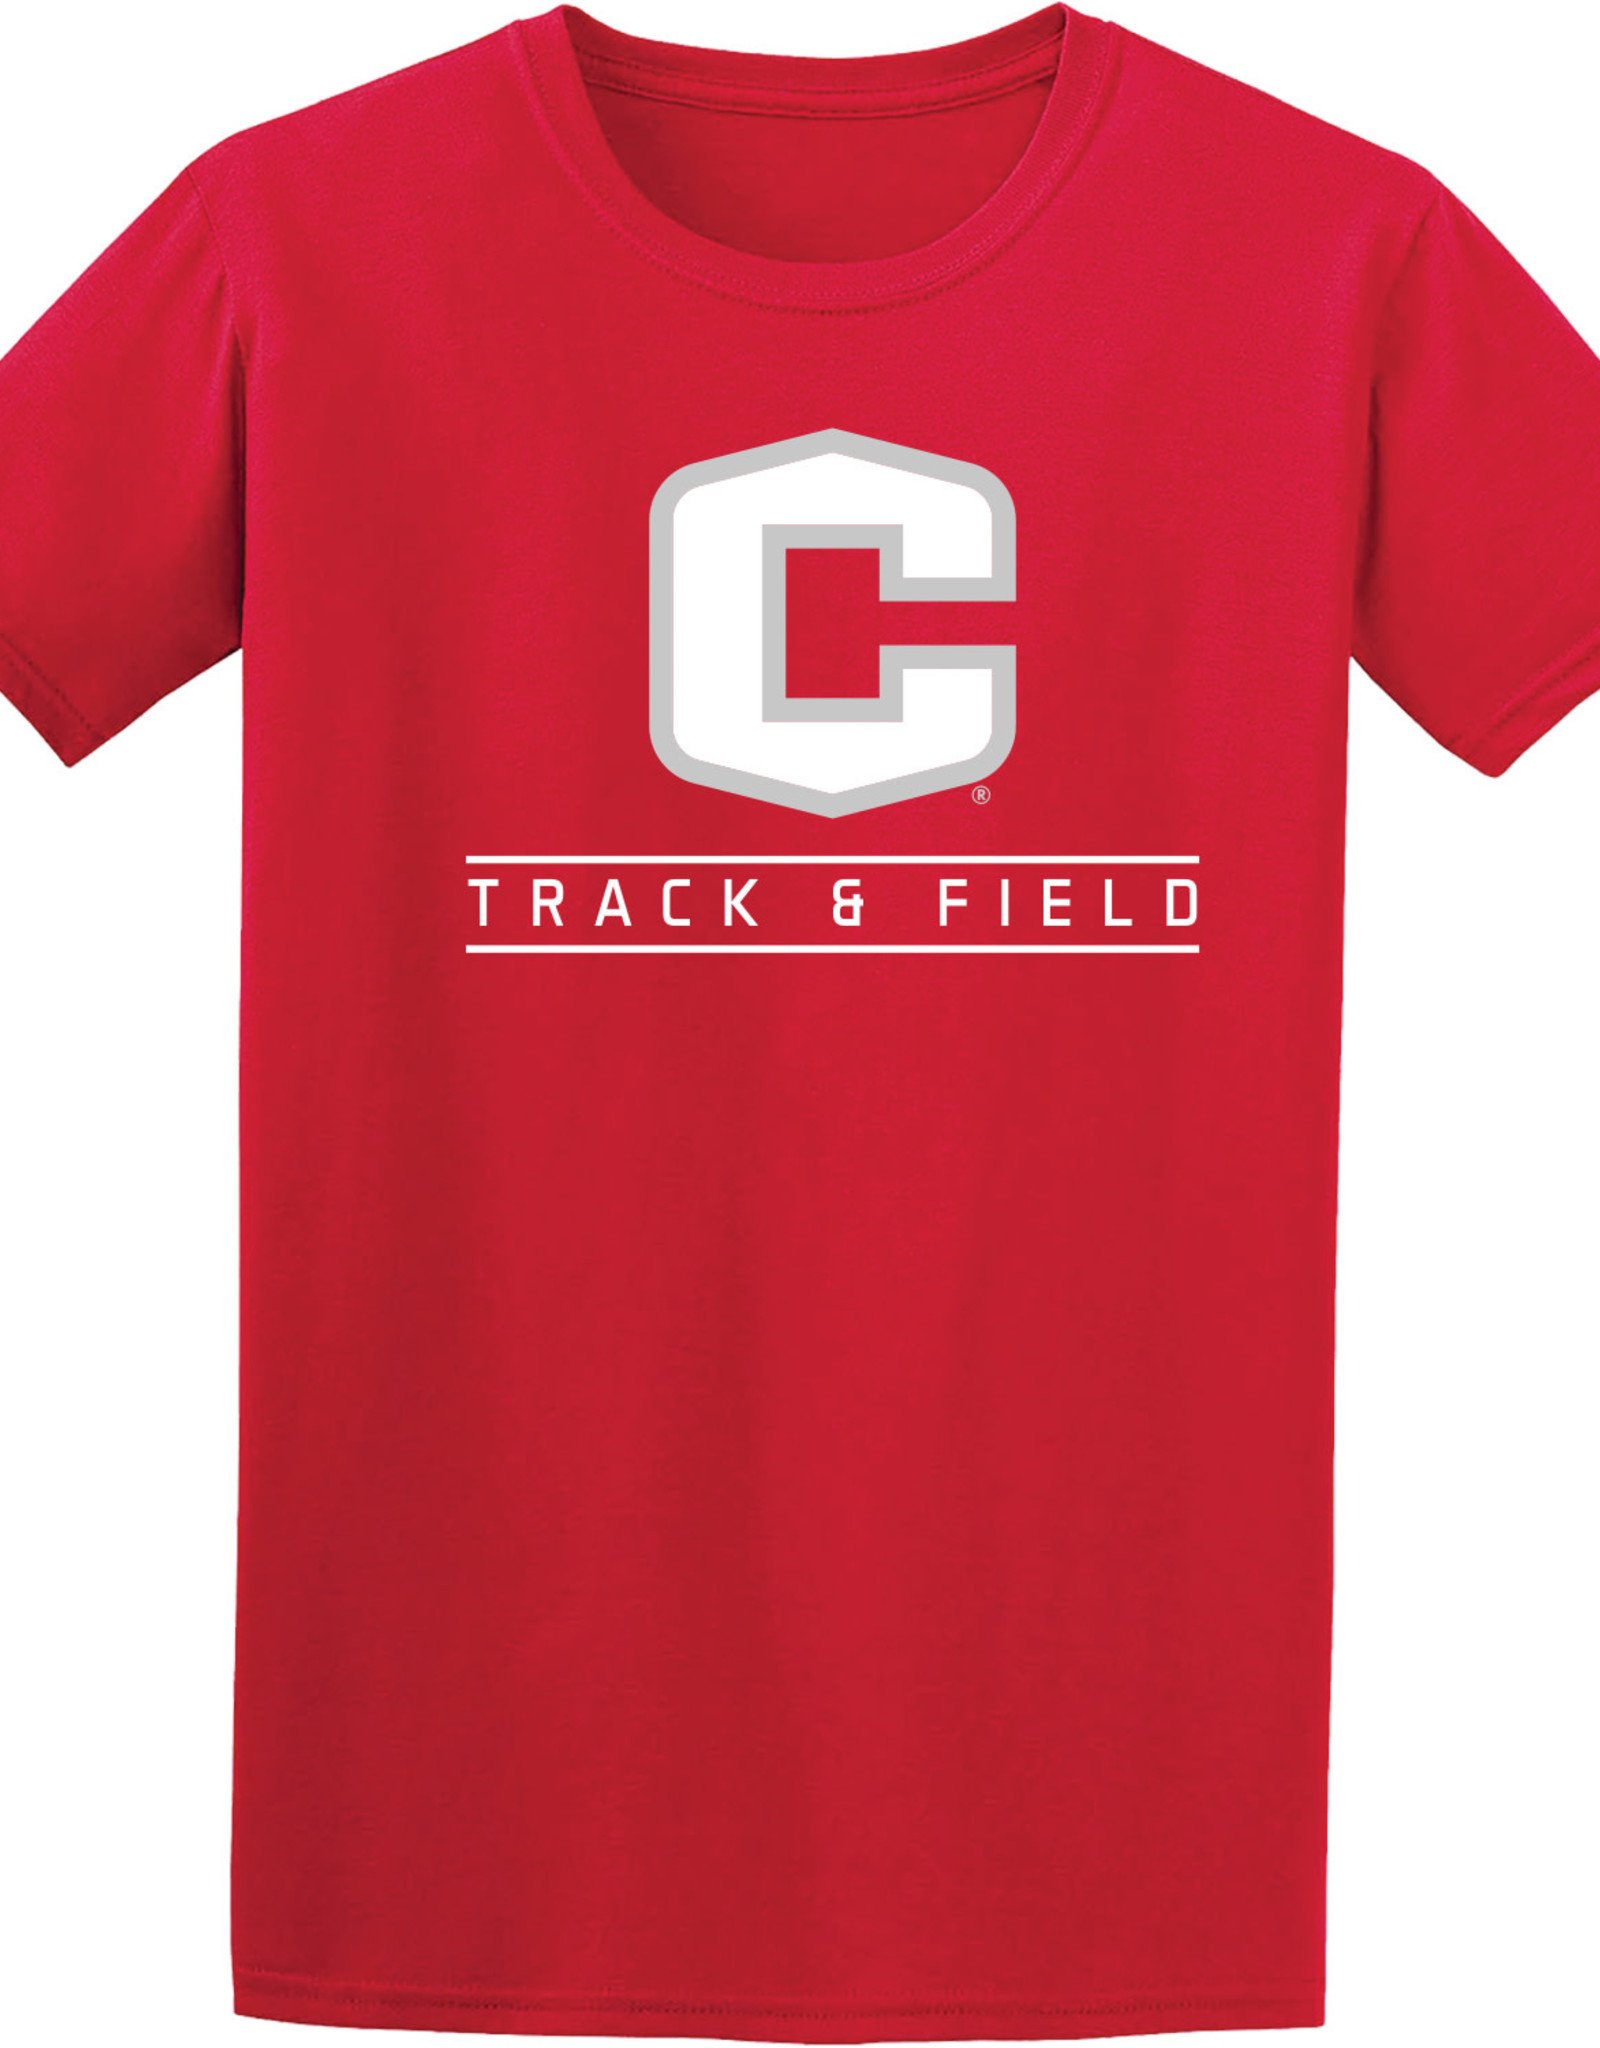 College House College House Sport Tee Track & Field Red